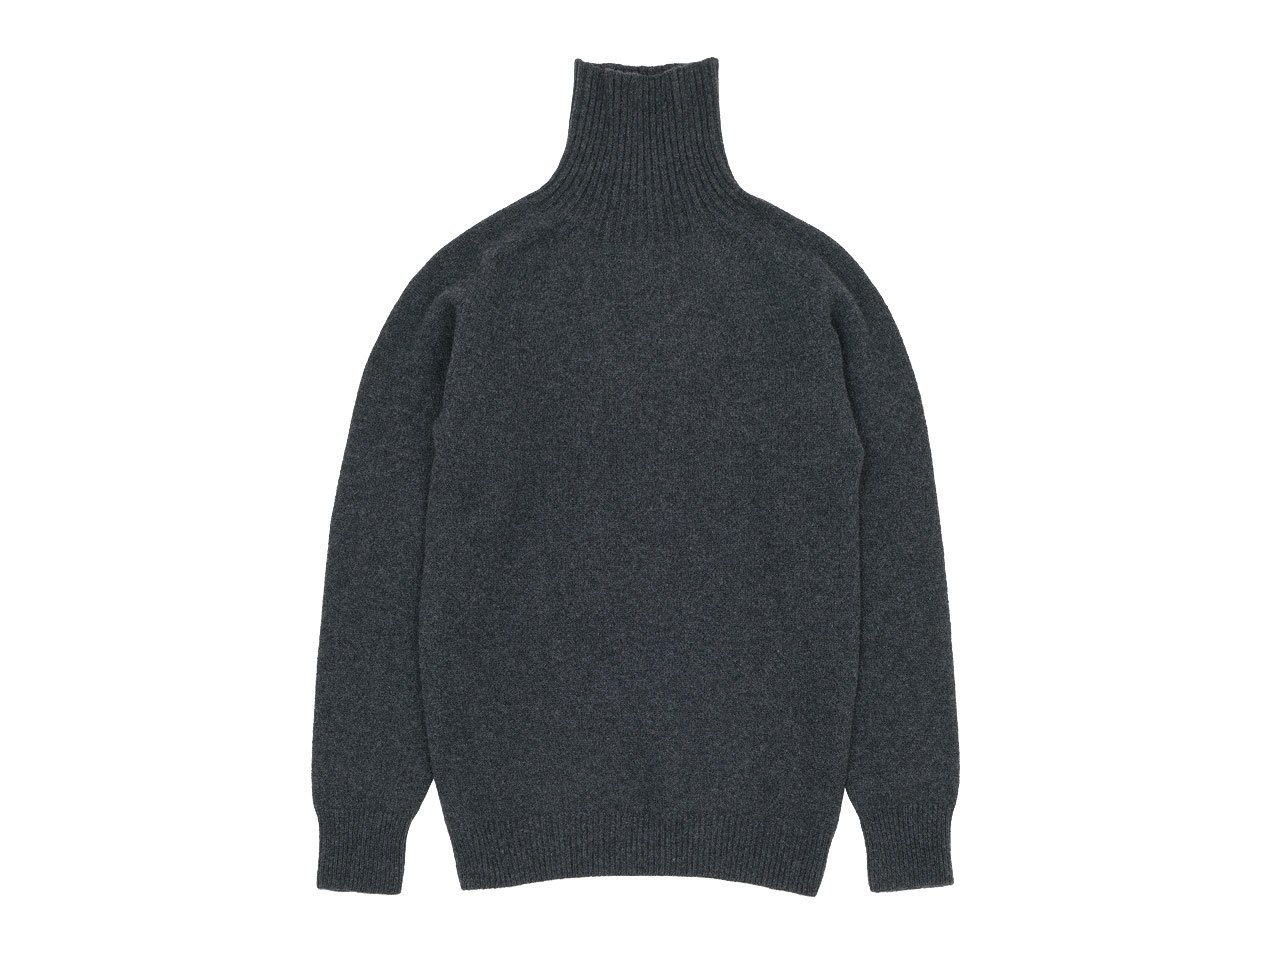 MARGARET HOWELL MERINO CASHMERE ROLL NECK KNIT 023CHARCOAL 〔メンズ〕